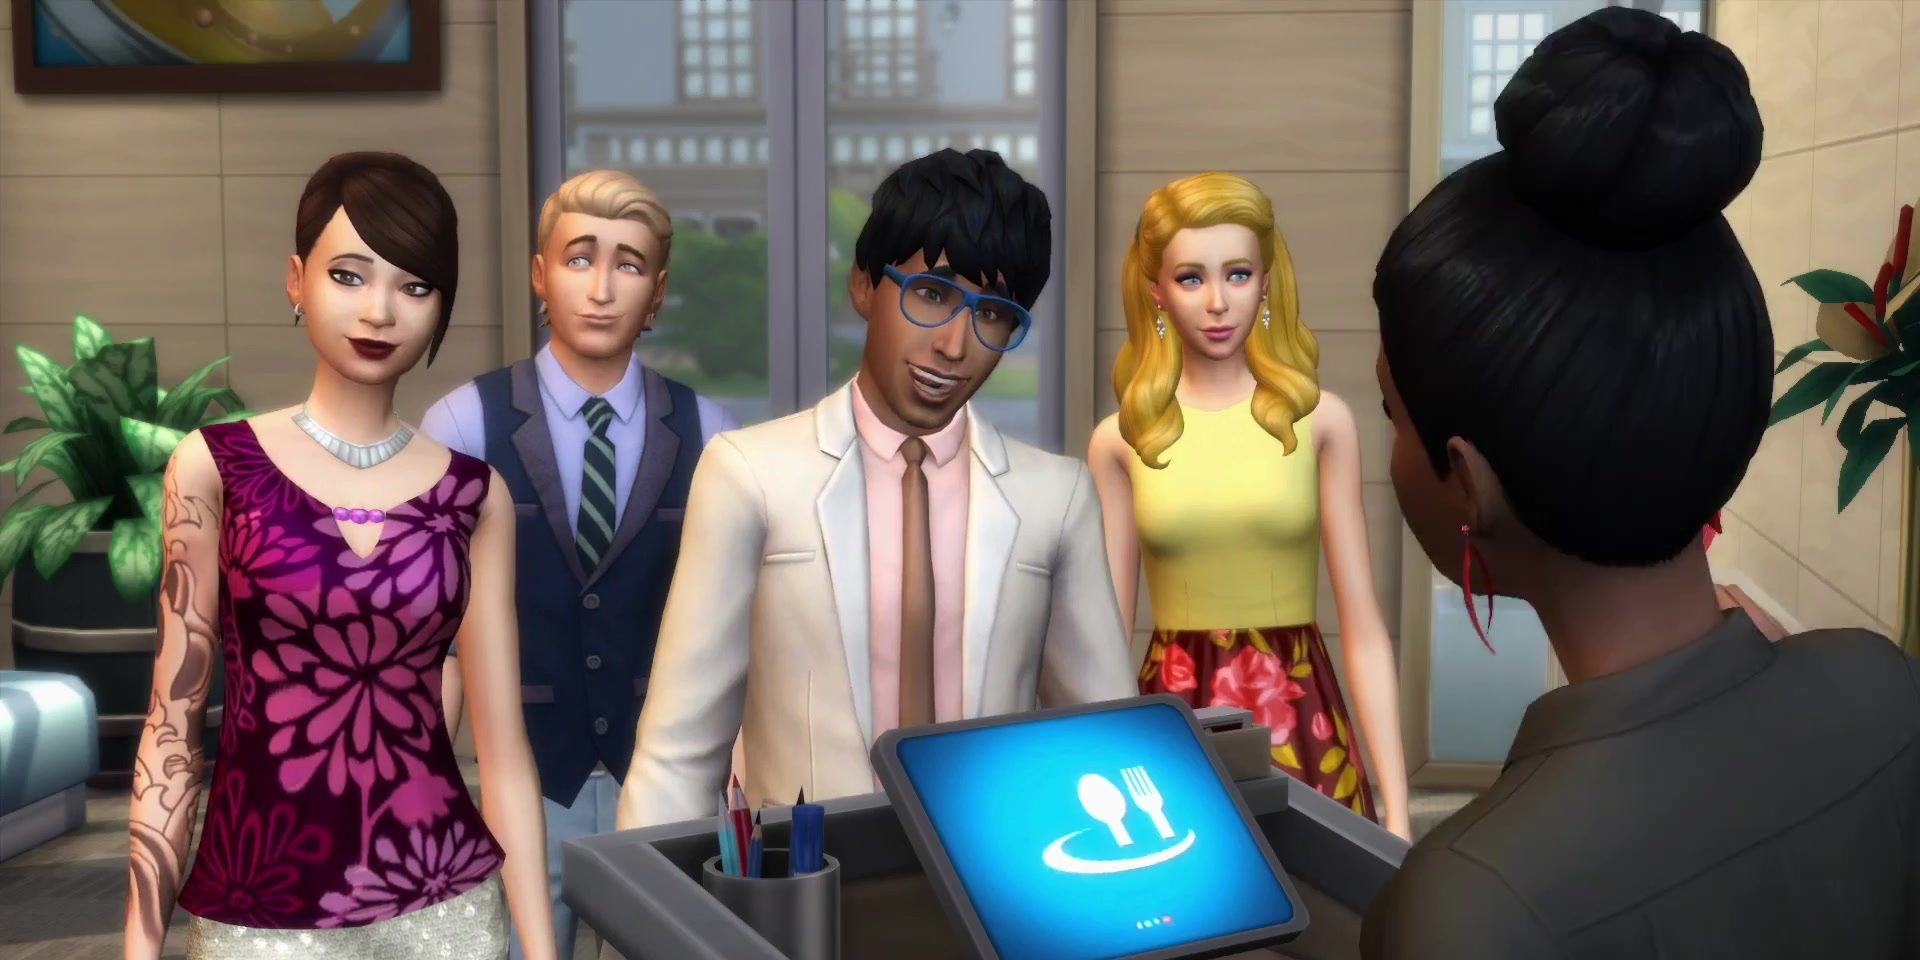 A hostess greets a group of dressed up Sims looking to dine at their restaurant